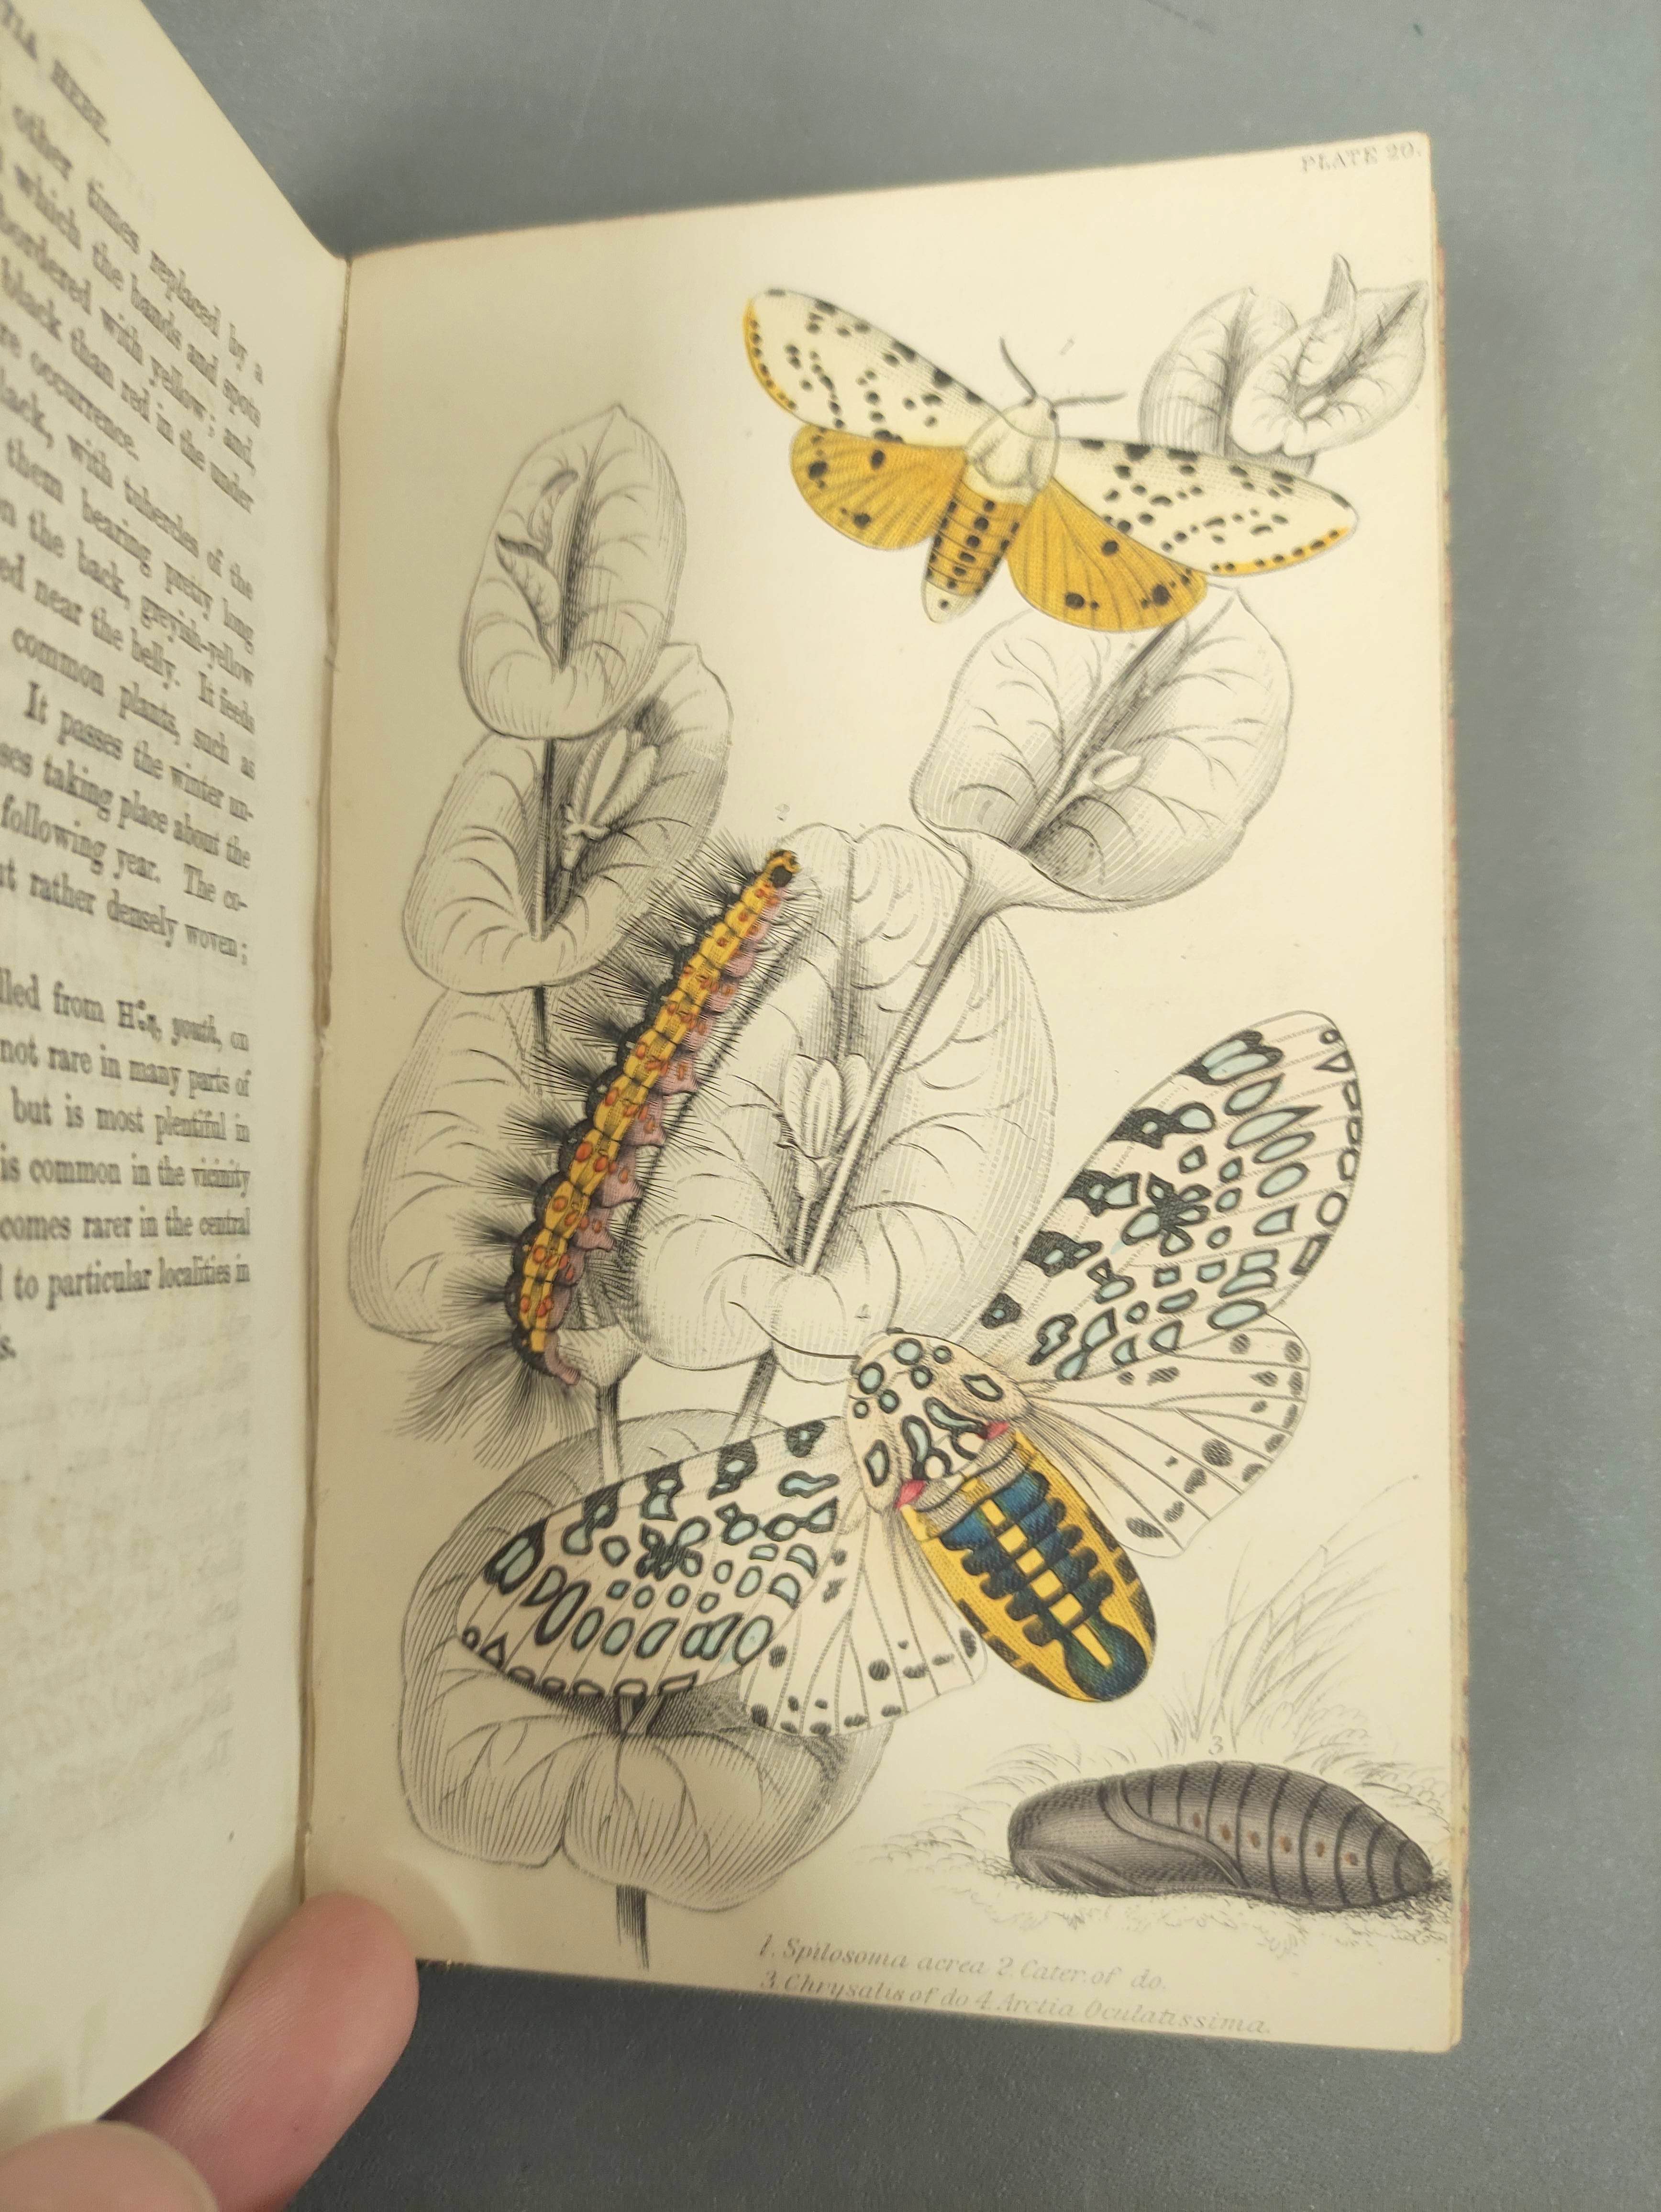 JARDINE SIR WILLIAM.  The Naturalist's Library. Vols. 32, 33 & 34 - Entomology (5, 6 & 7) re. exotic - Image 7 of 7